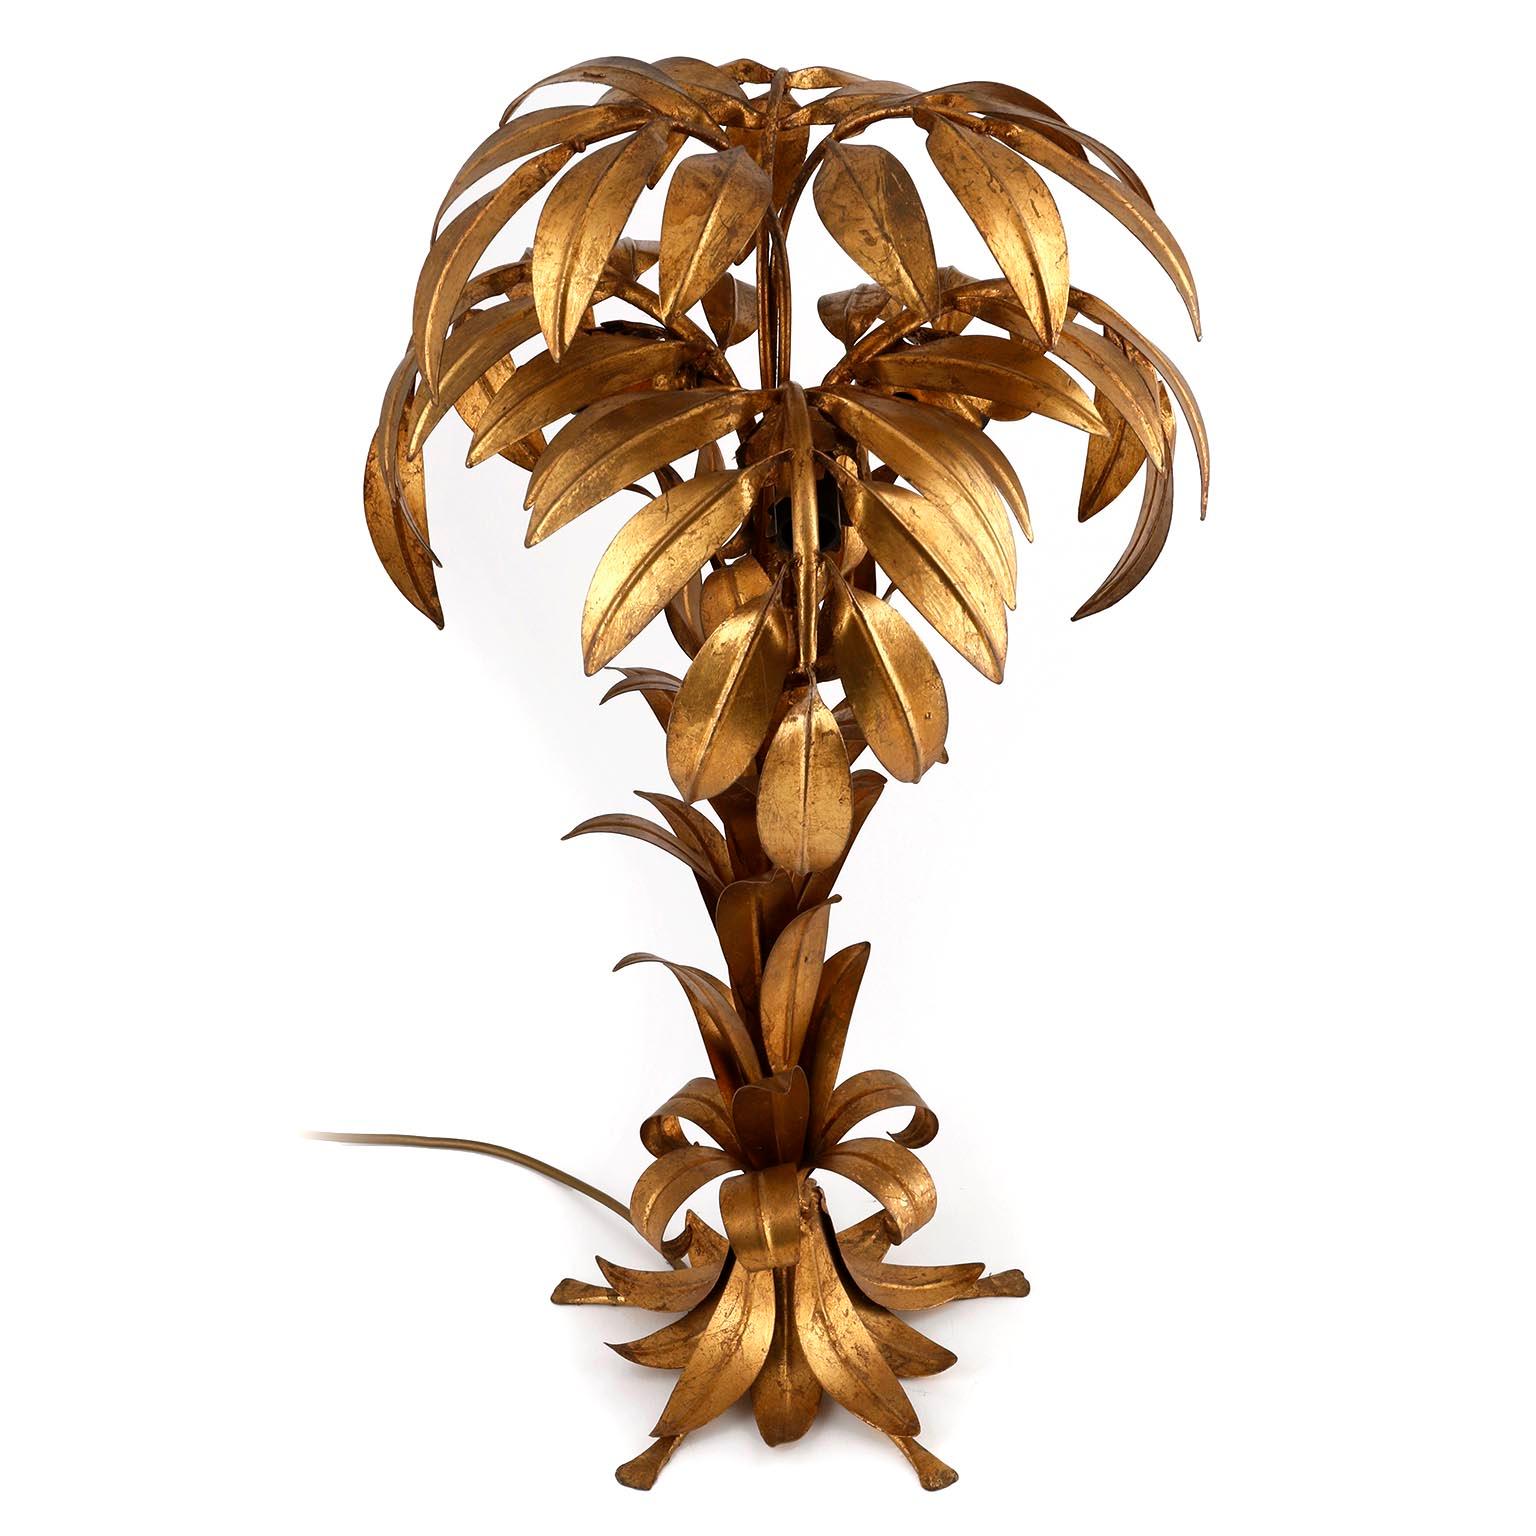 A Hollywood Regency table lamp by Hans Kögl (Koegl or Kogl), Germany, manufactured in midcentury, circa 1970.
A beautiful light fixture in the form of a palm tree made of metal coated with gold leaf. The light has three sockets for small base screw